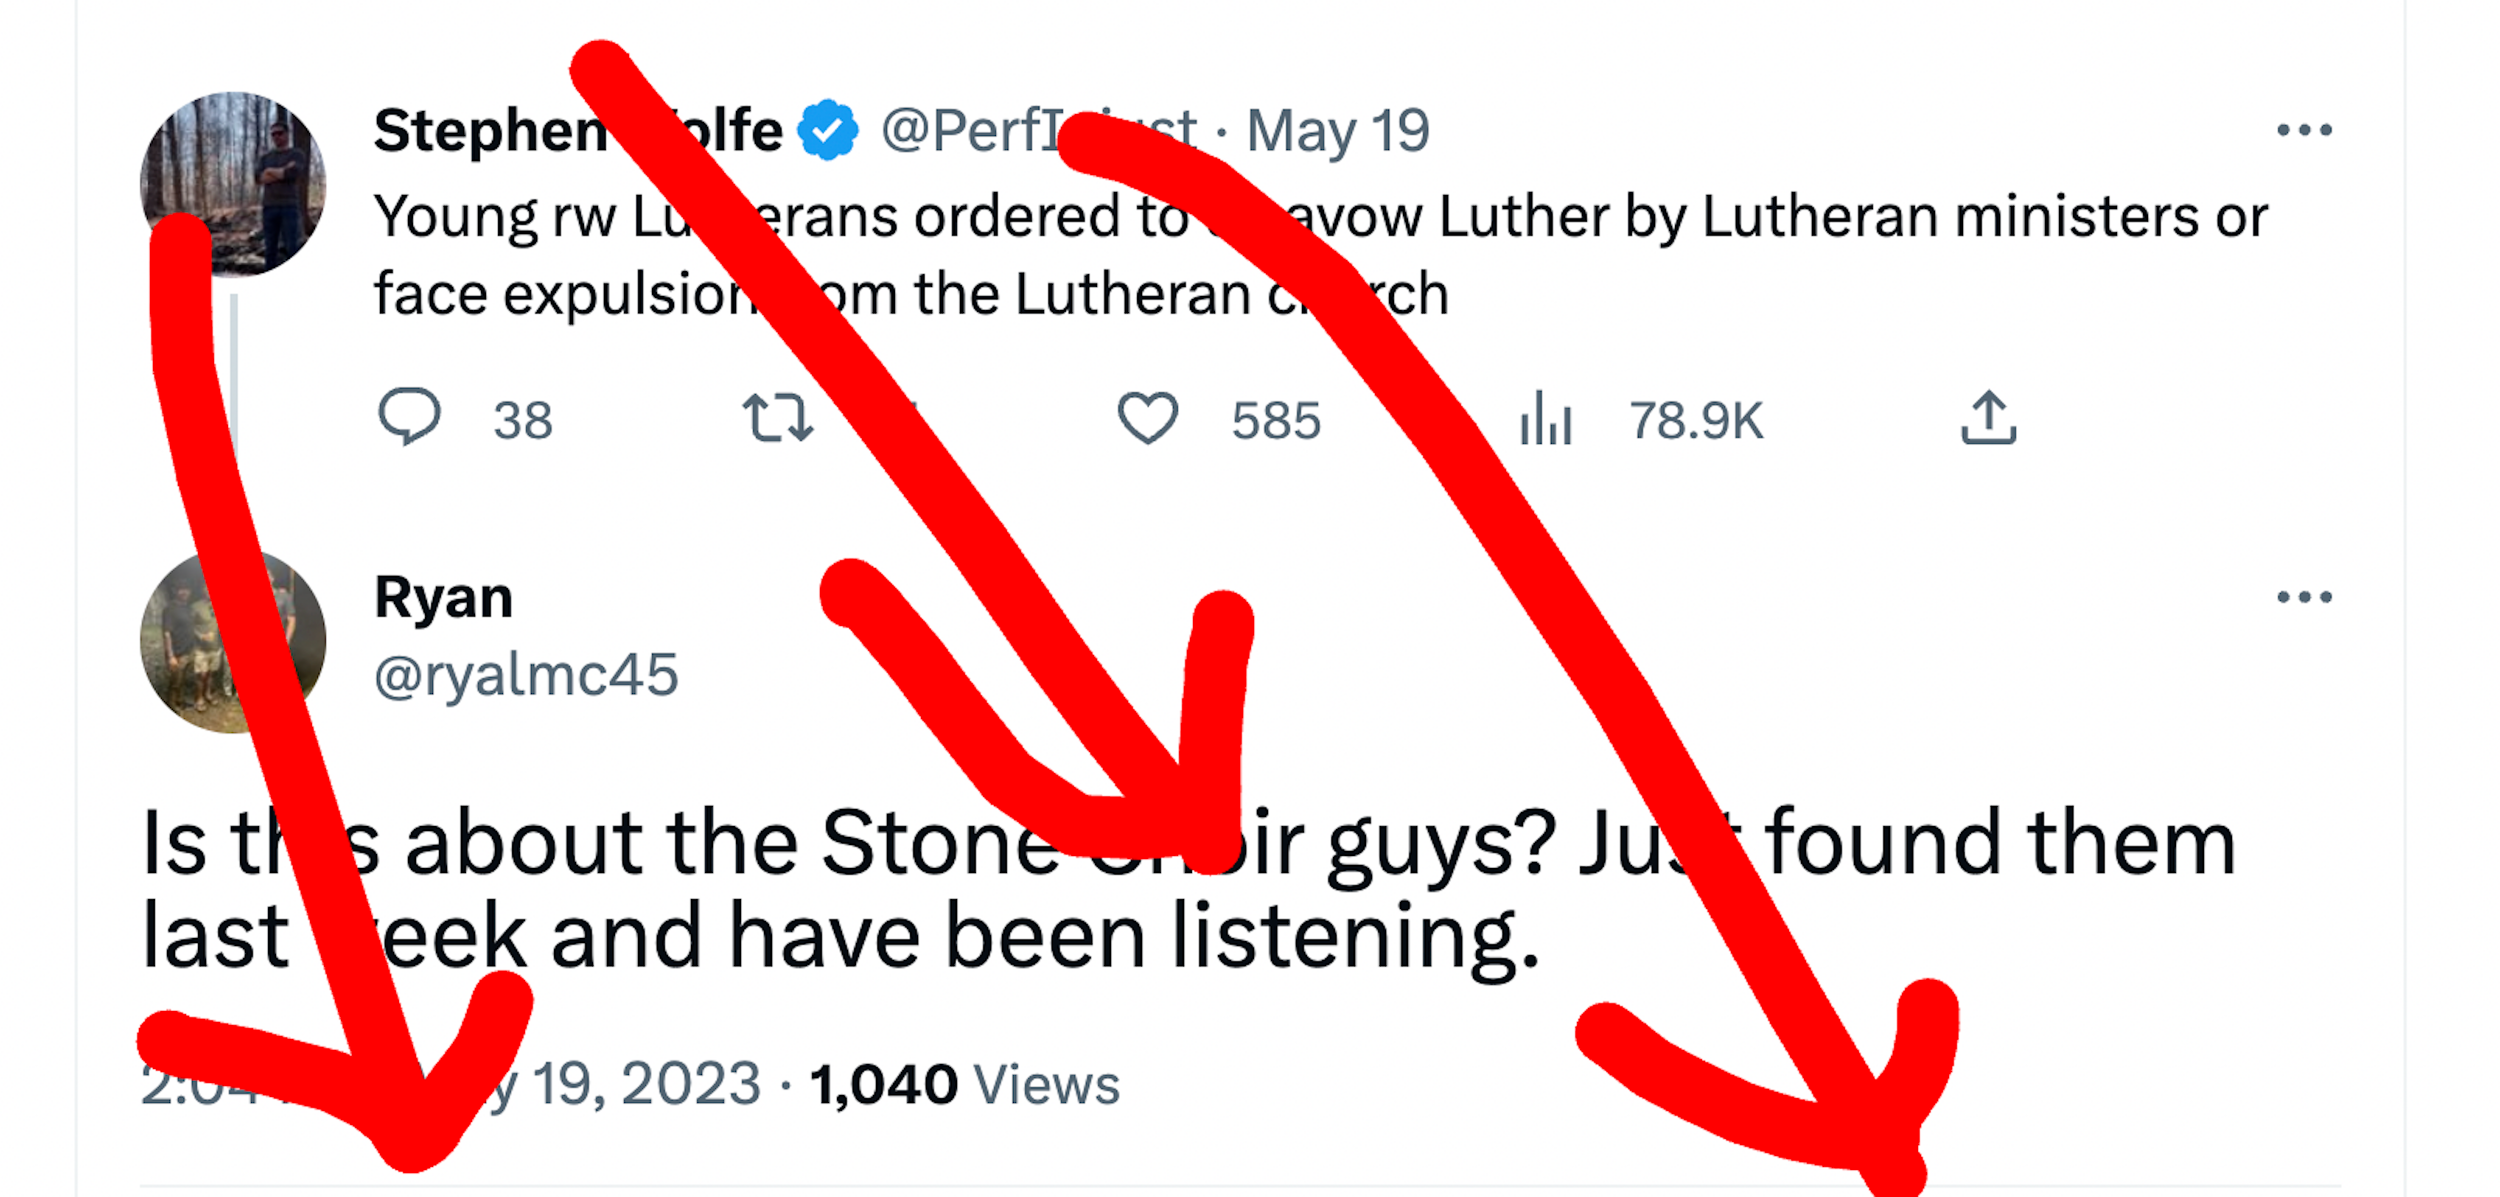 Stephen Wolfe: Young rw Lutherans ordered to disavow Luther by Lutheran ministers or face expulsion from the Lutheran church. Reply from "ryan": "Is this about the Stone Choir guys? just found them last week and have been listening.'